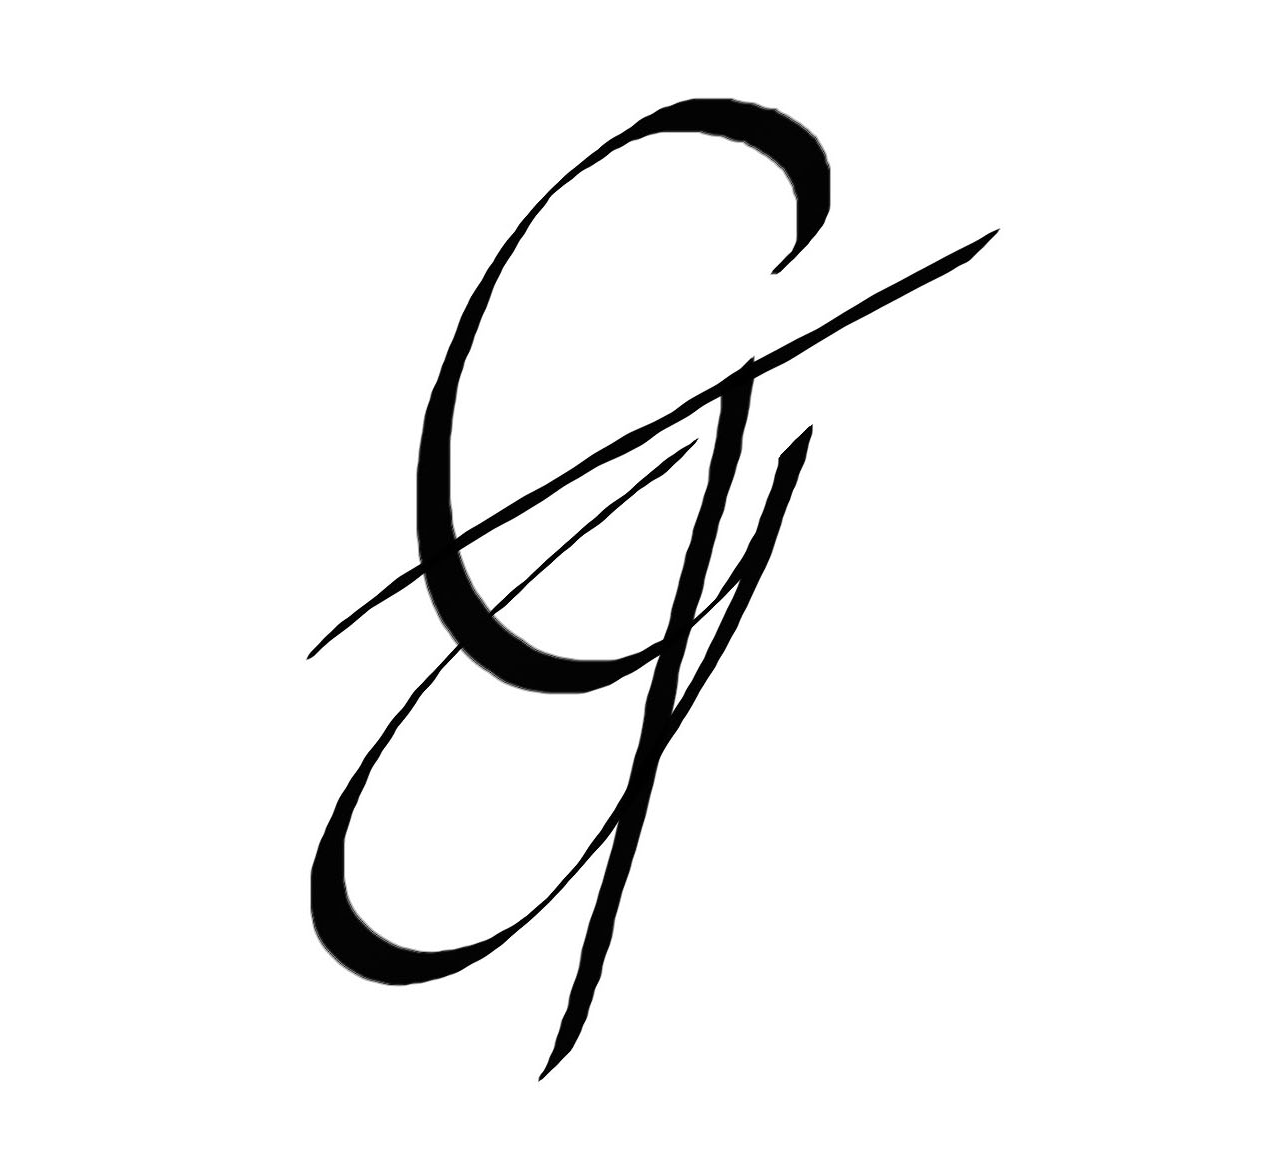 The letters G and T written by hand in black ink.